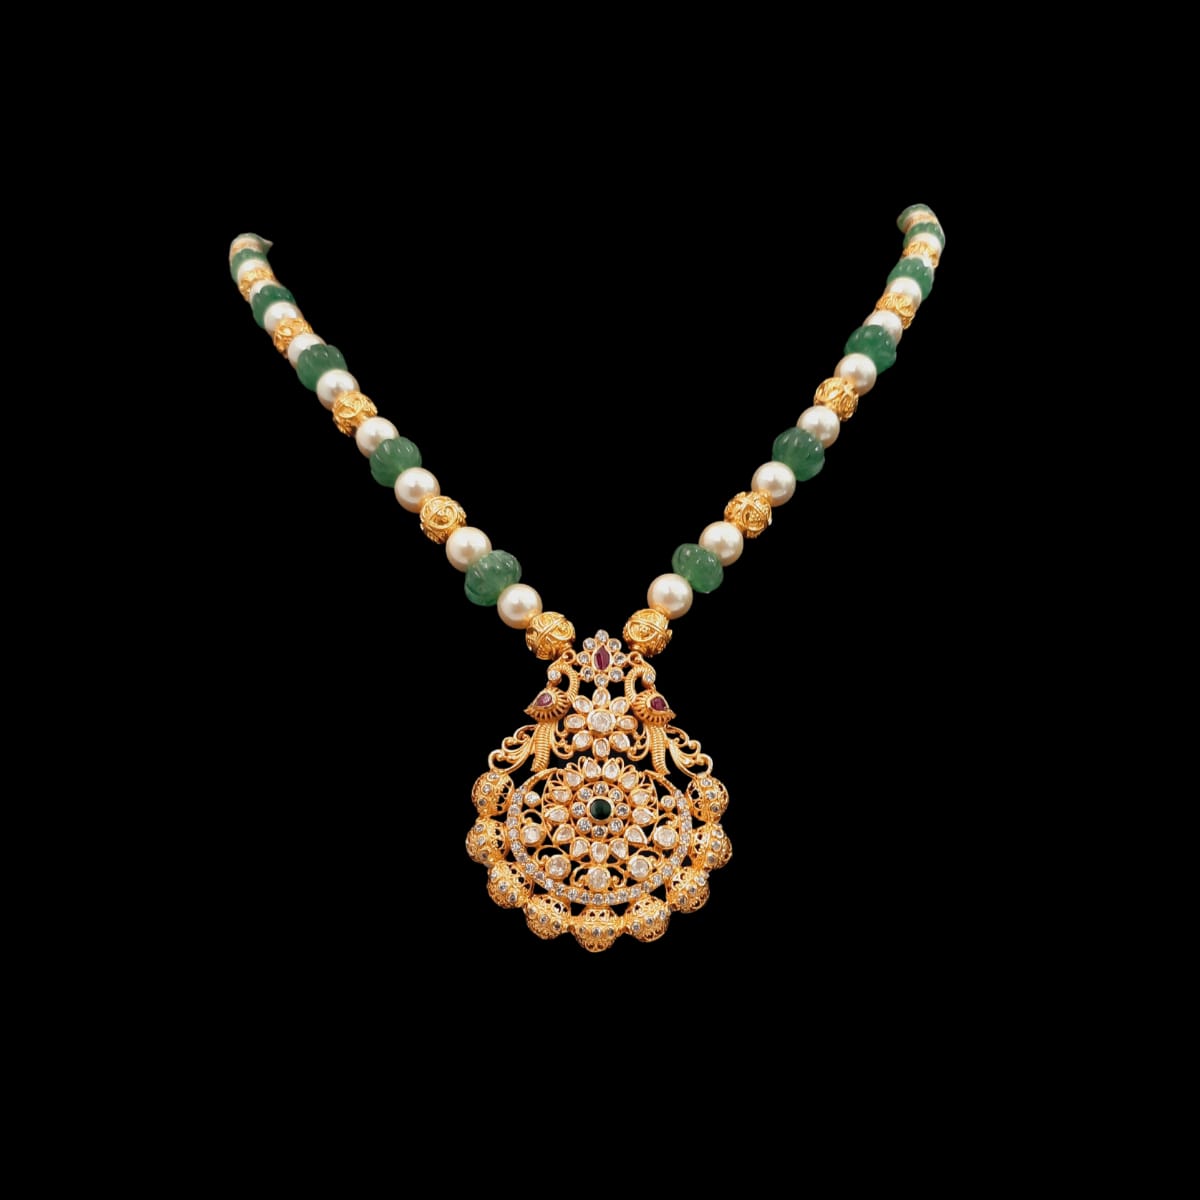 Exquisite Gemstone Pendant With Beads And Pearls Necklace